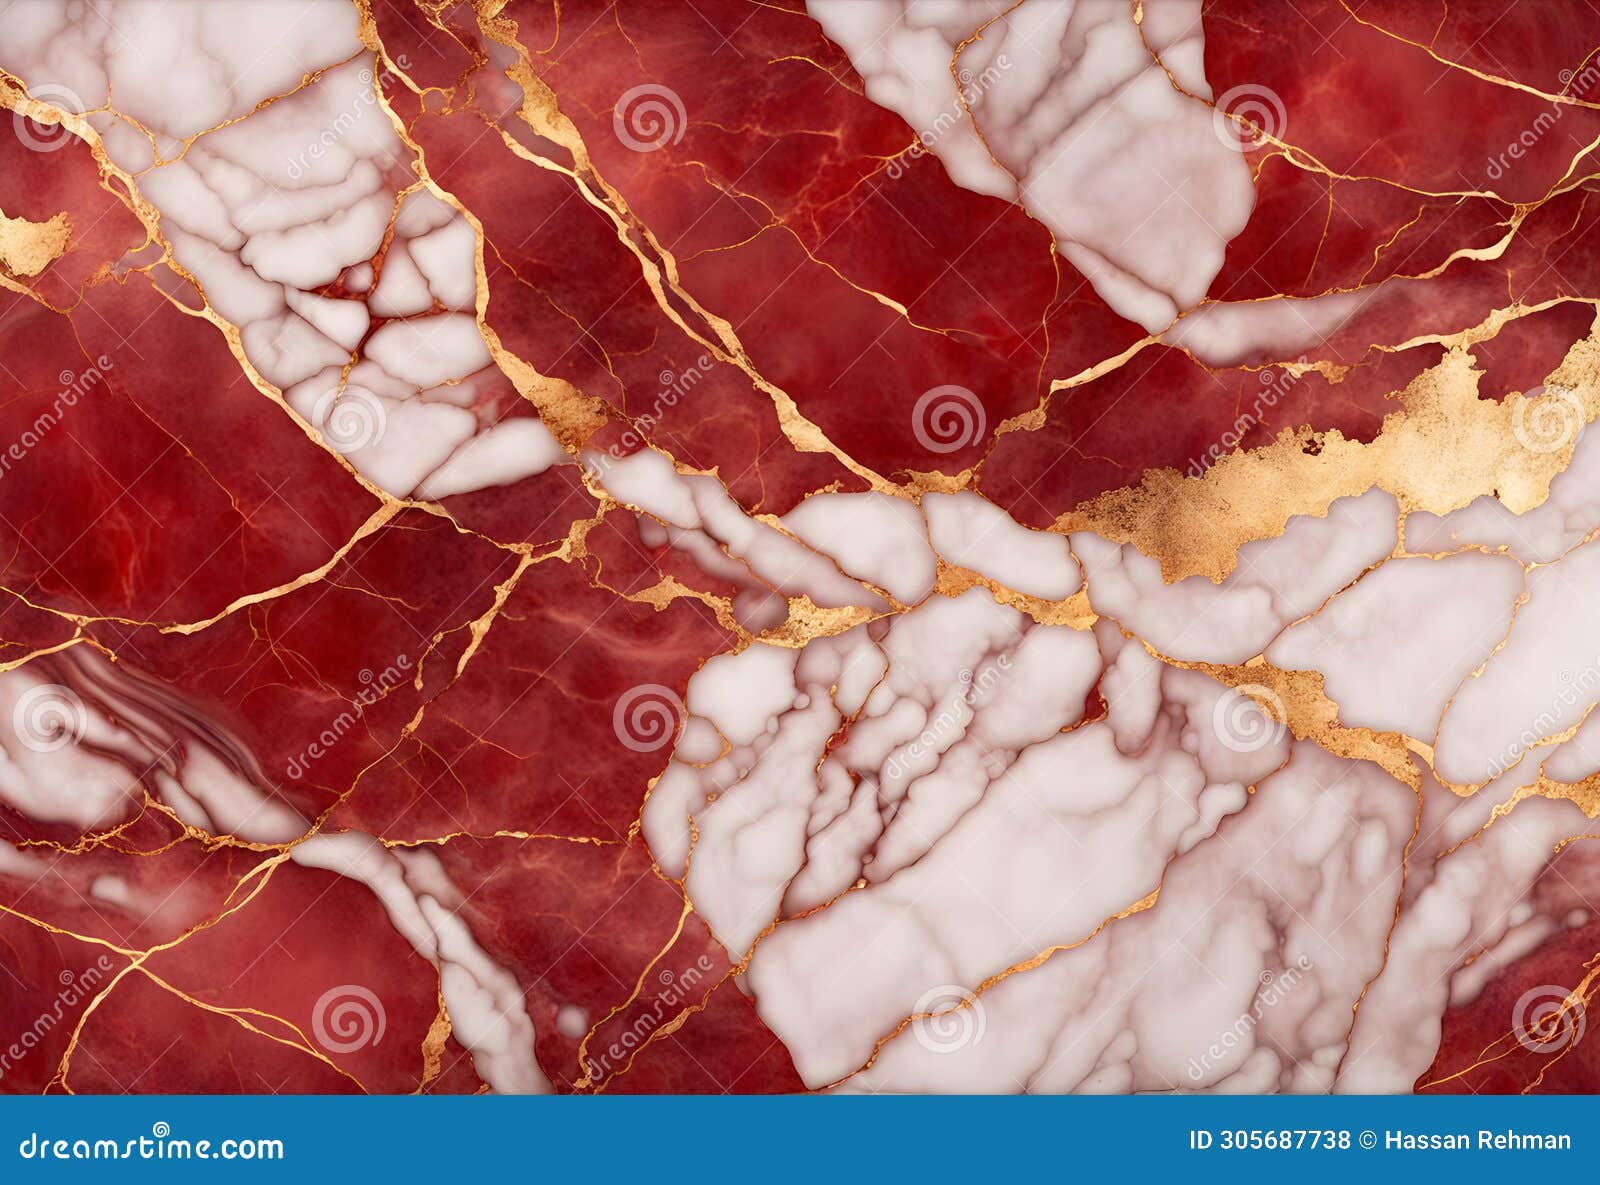 red marble texture with golden veins marbletexture